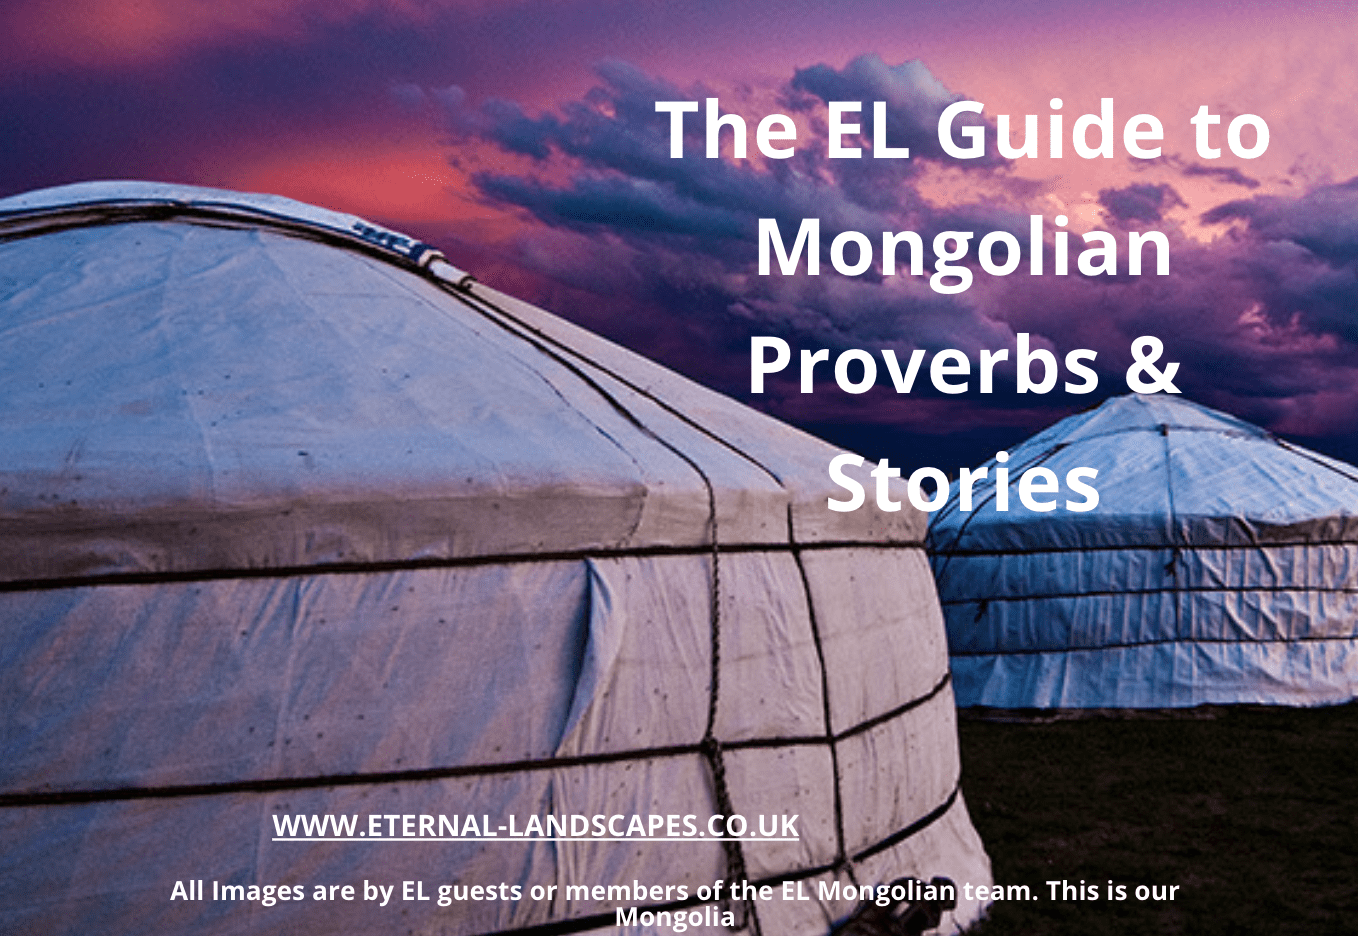 The EL Guide To Mongolian Proverbs & Stories